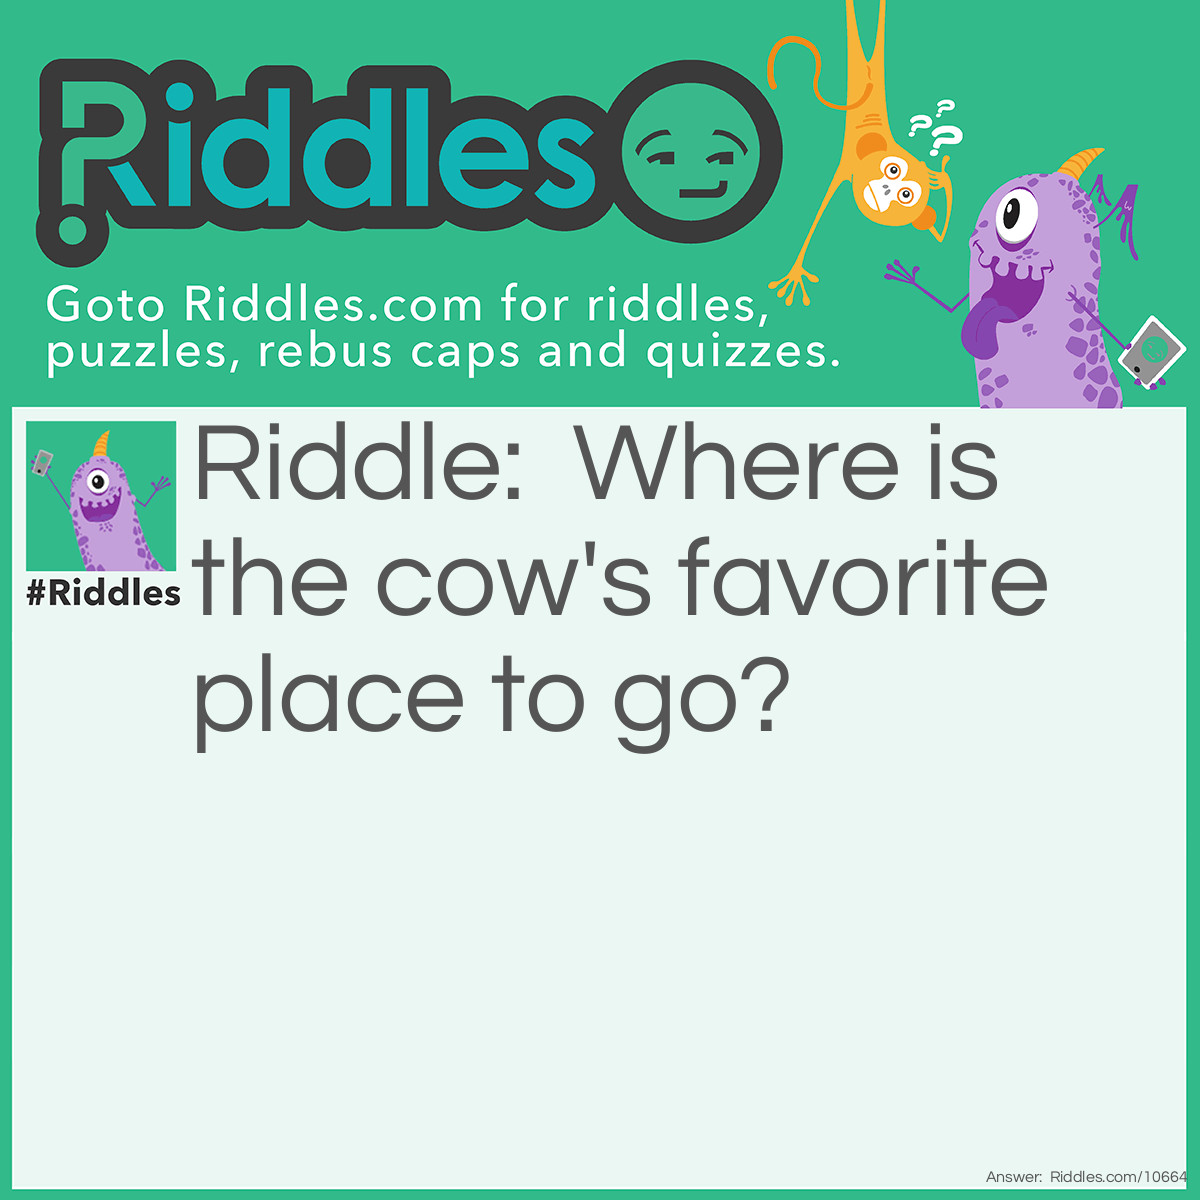 Riddle: Where is the cow's favorite place to go? Answer: The Mooooooooooooooooooooovies